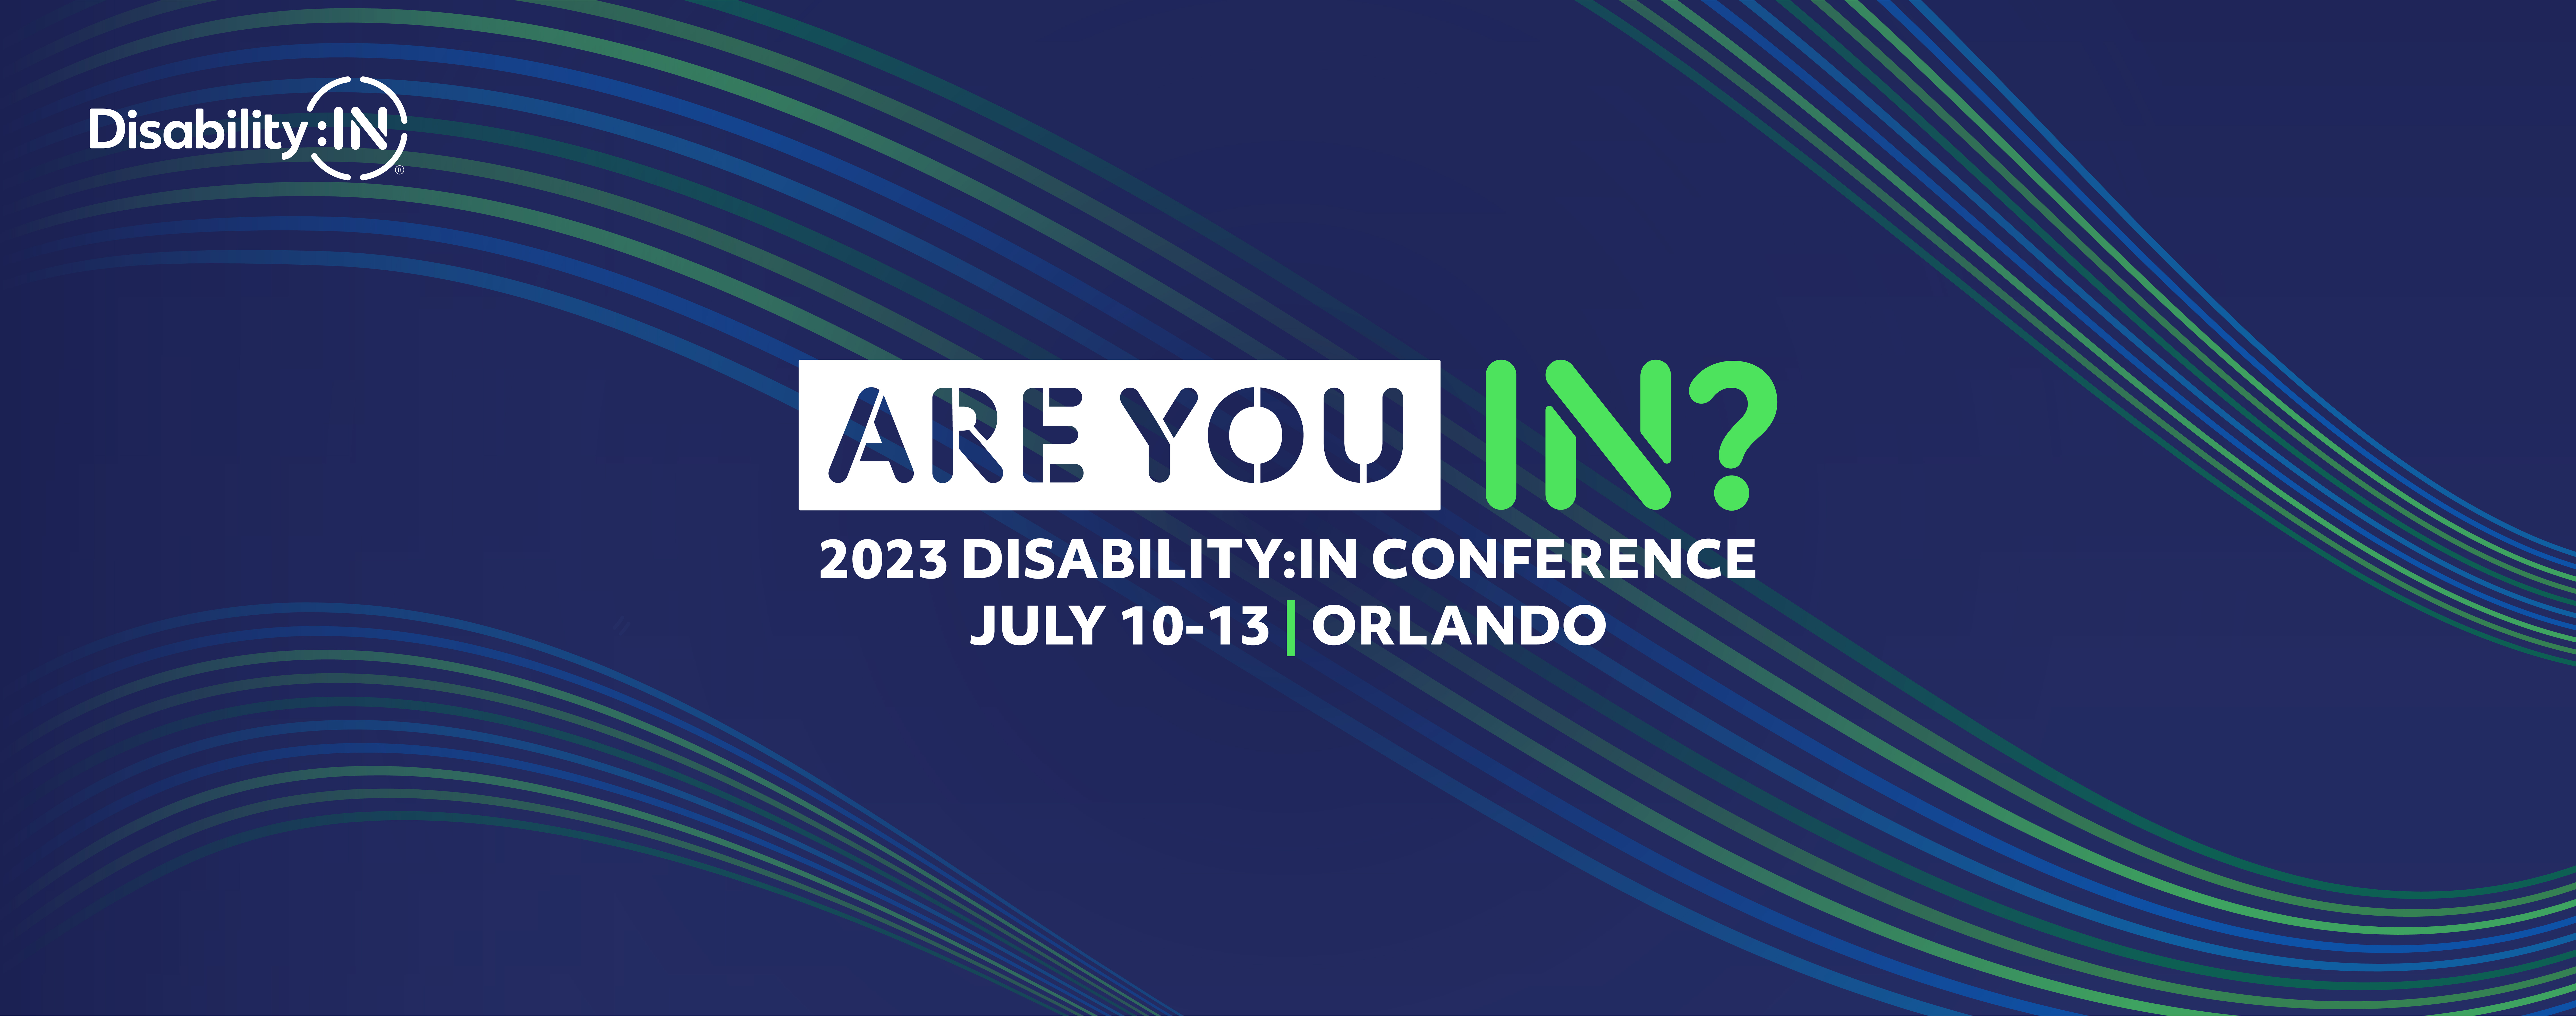 Are You IN? 2023 Disability:IN Conference from July 10-13 in Orlando. Blue and green varying stripes across a navy blue background.